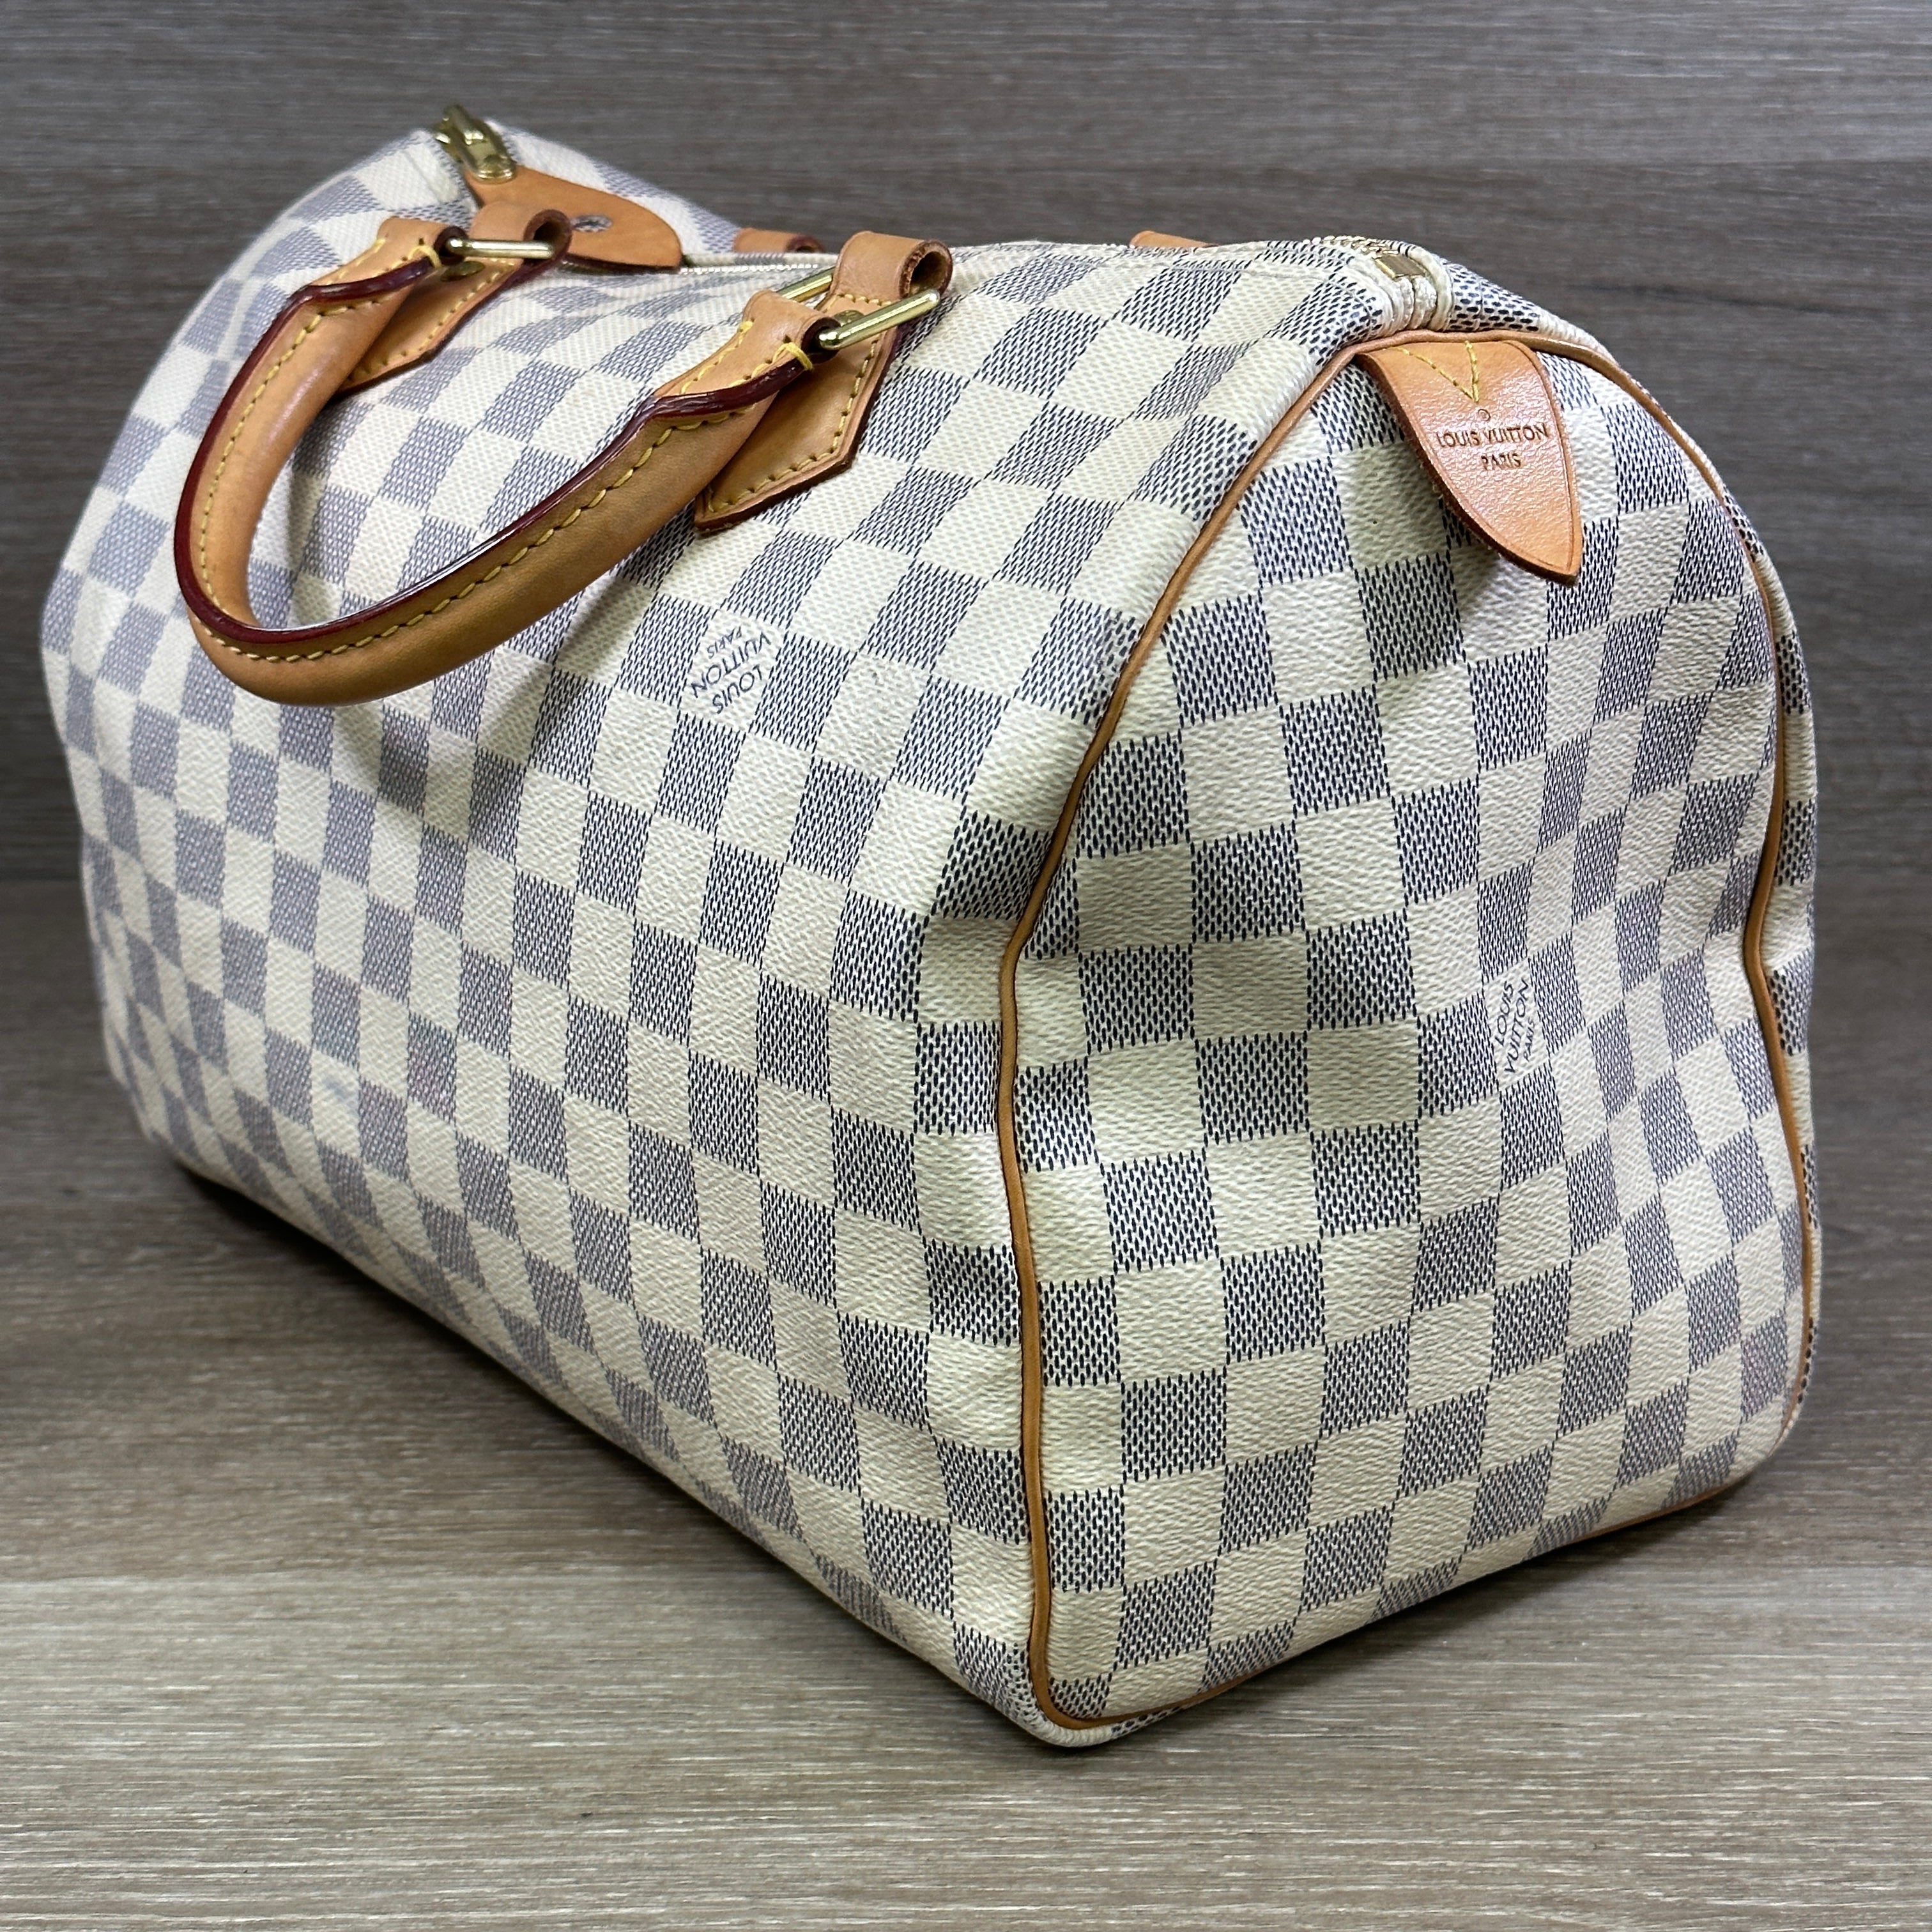 How to SPOT an AUTHENTIC LOUIS VUITTON SPEEDY 30 HANDBAG and WHERE